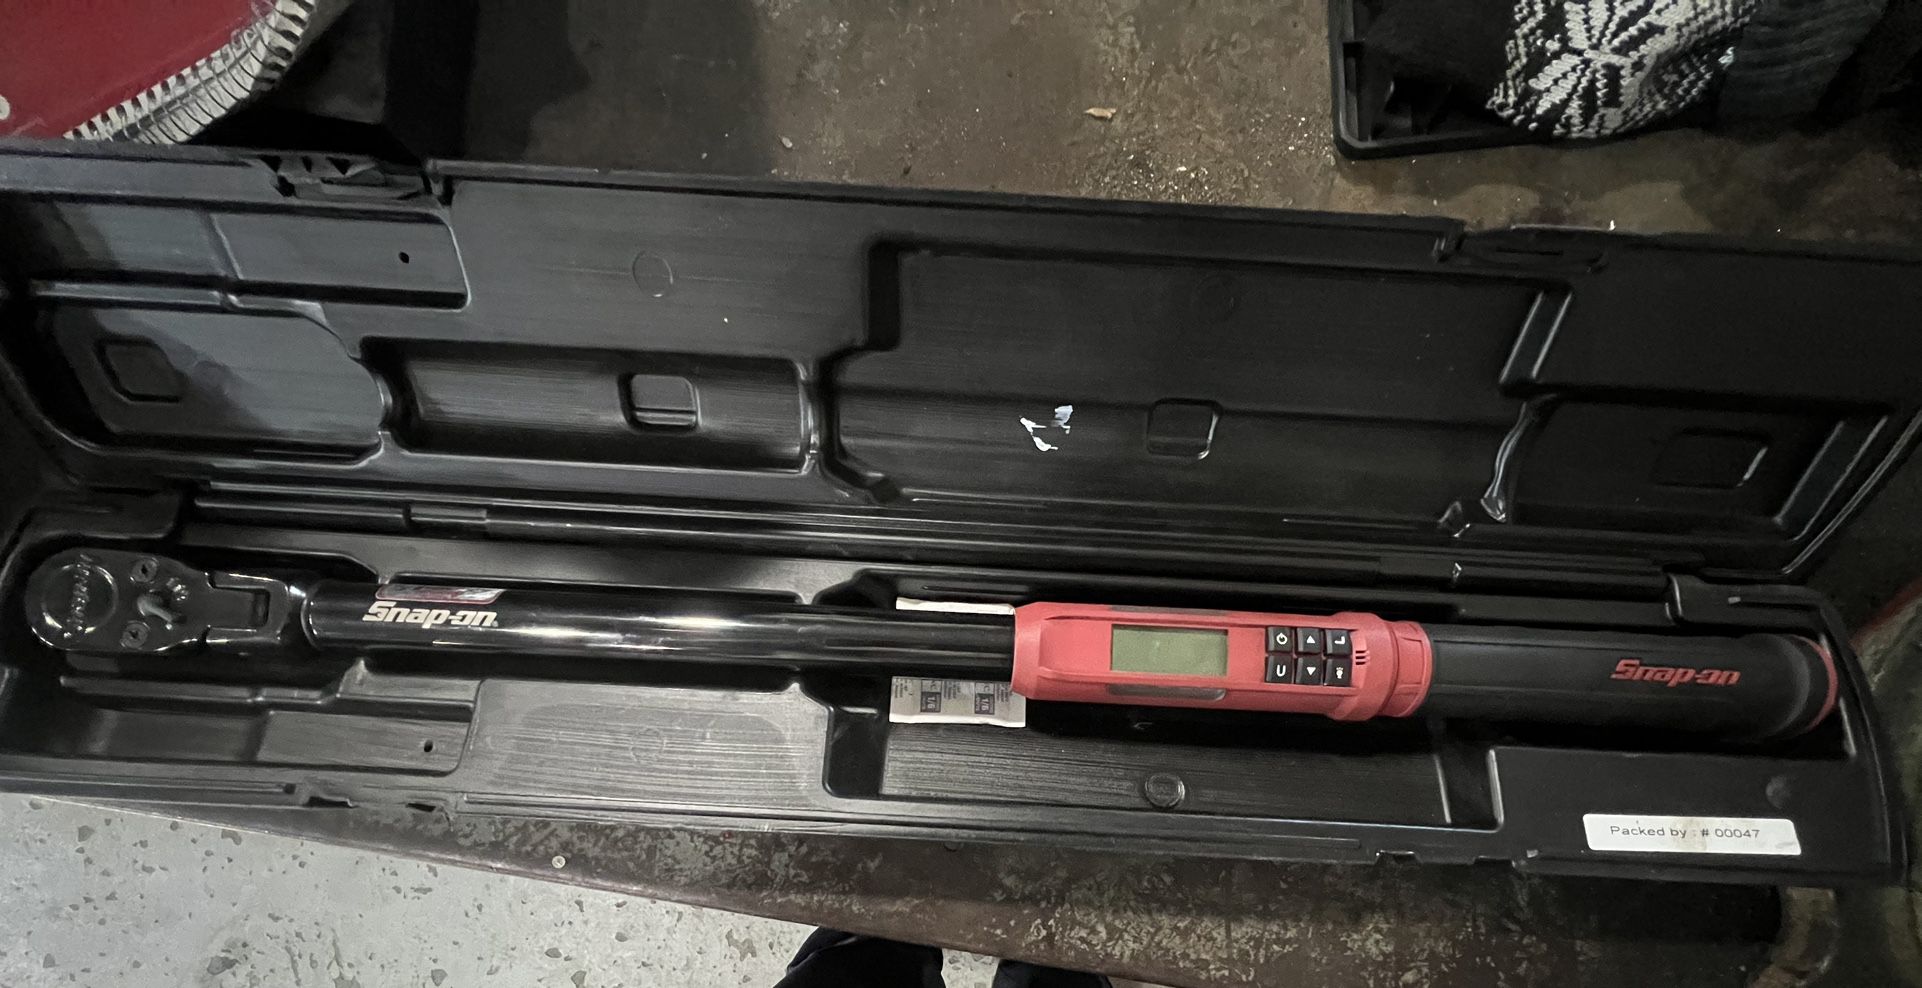 Snap on Digital Torque Wrench